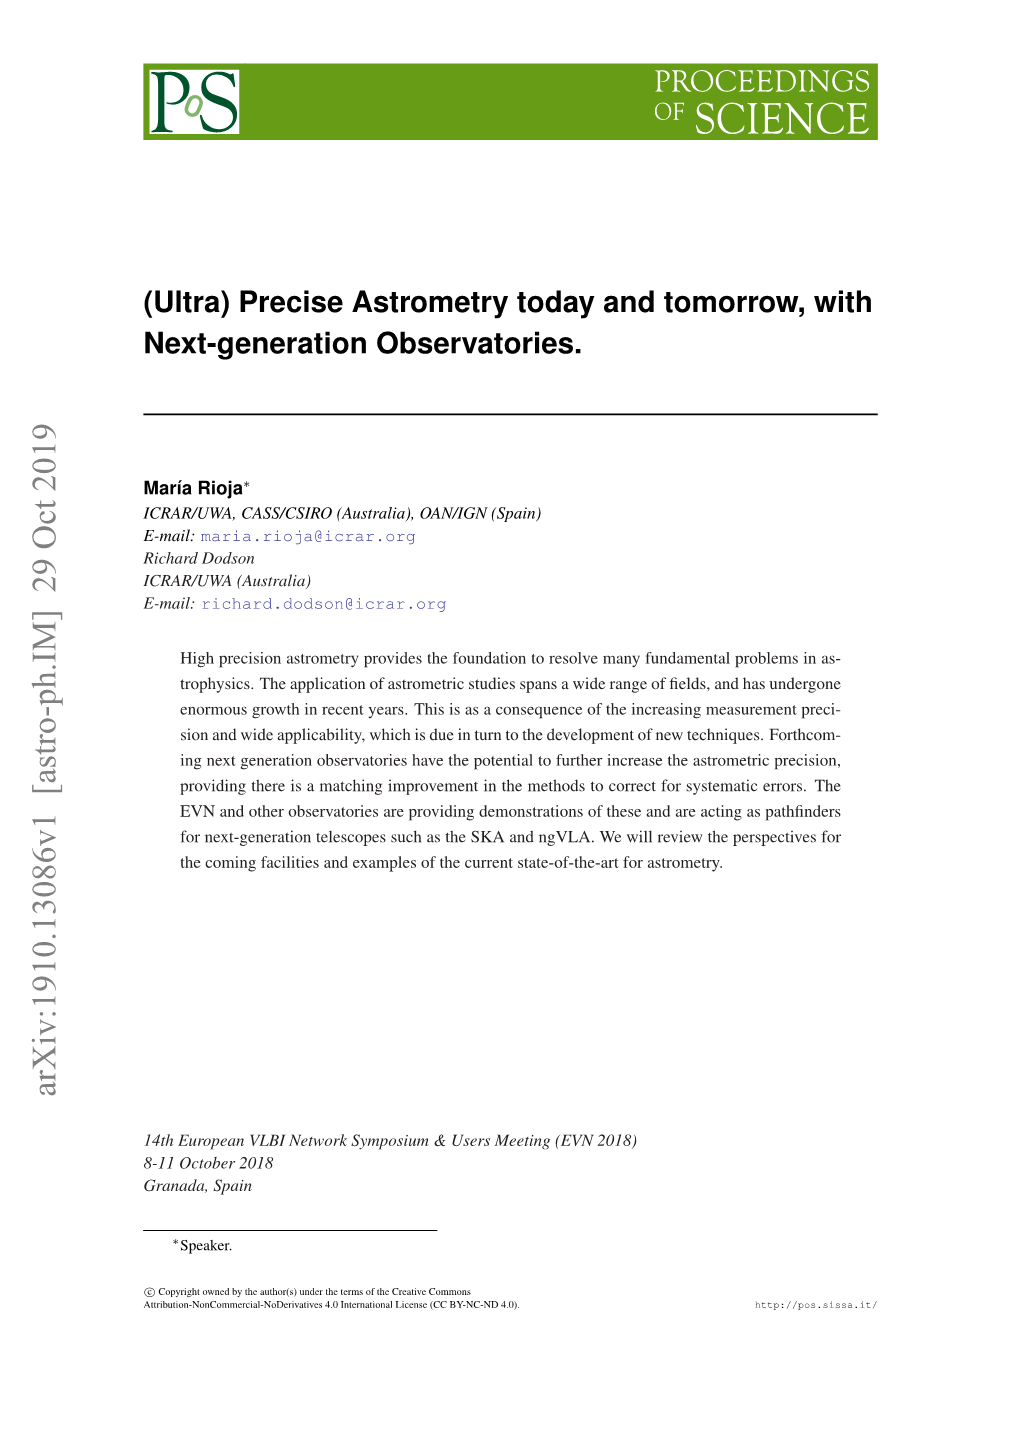 (Ultra) Precise Astrometry Today and Tomorrow, with Next-Generation Observatories